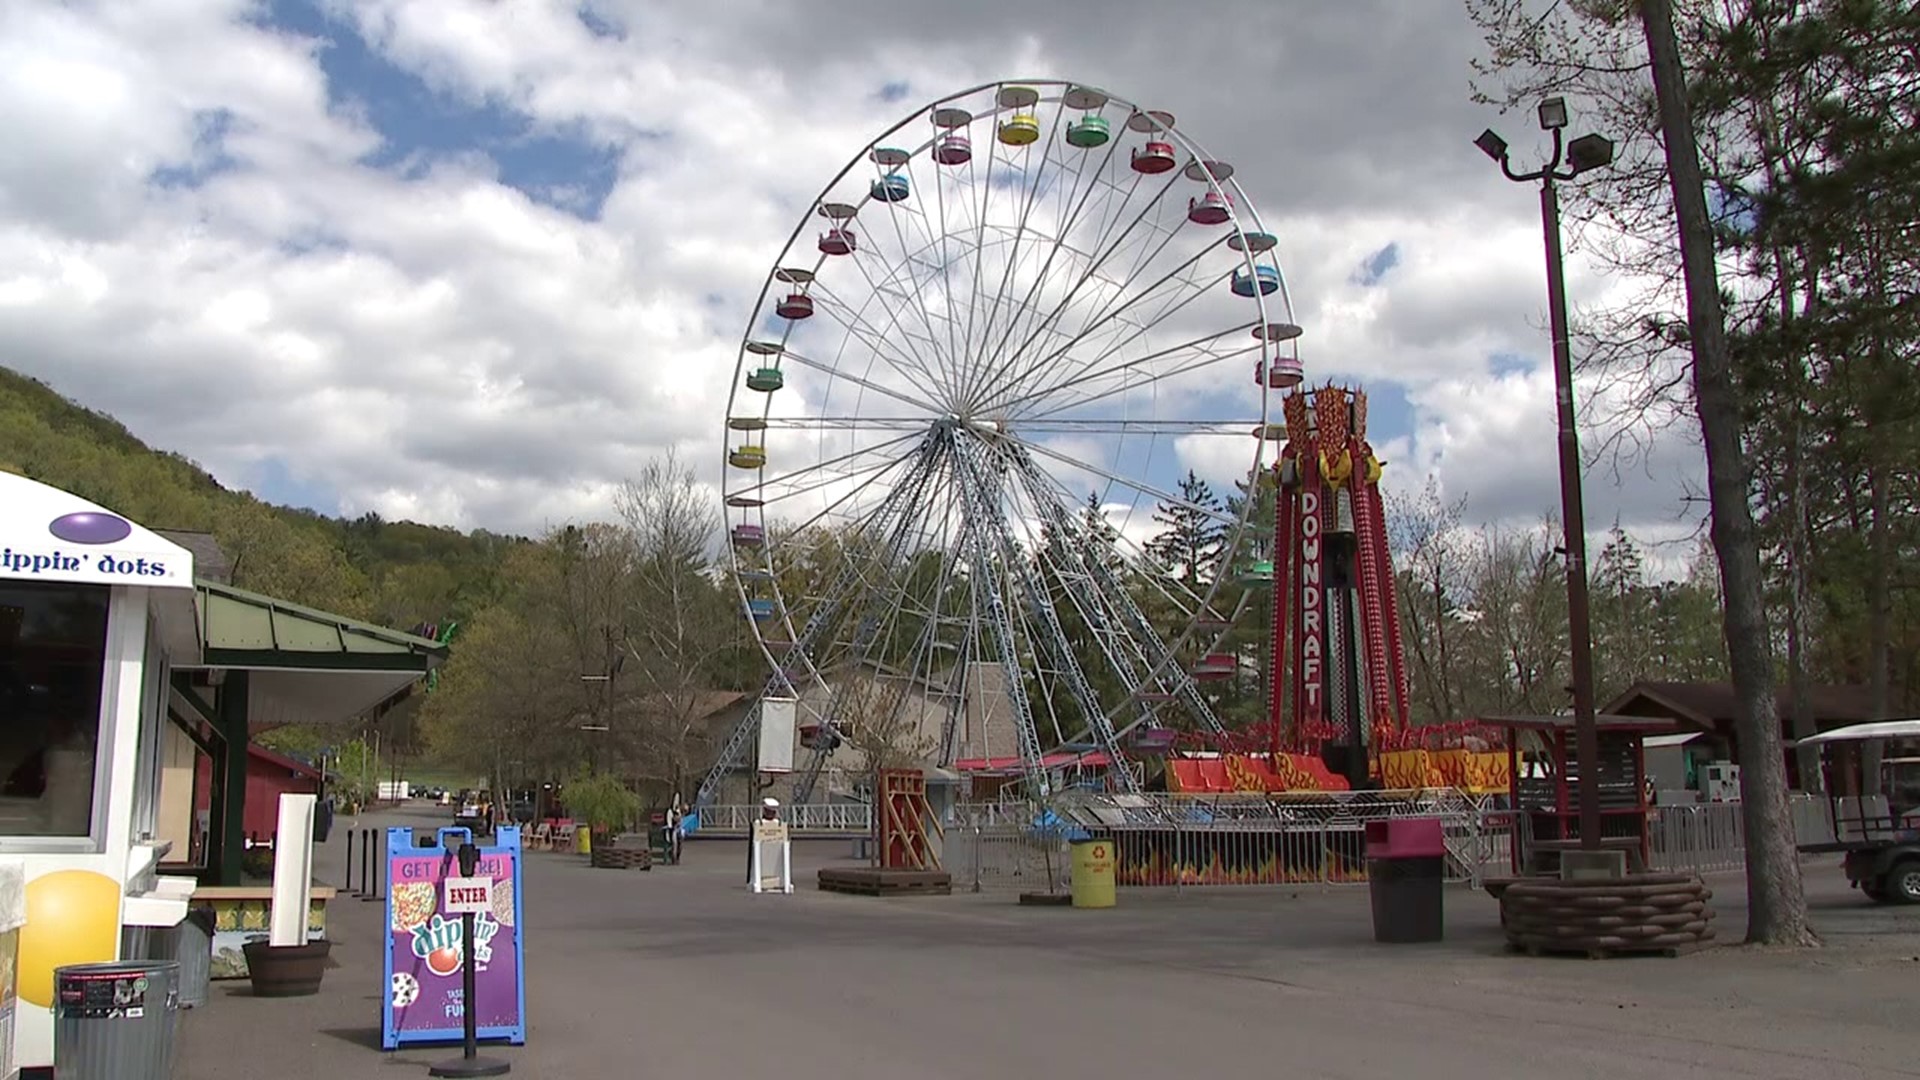 In just a few days you will once again be able to experience the food, fun, and fantasy that is Knoebels Amusement Resort.